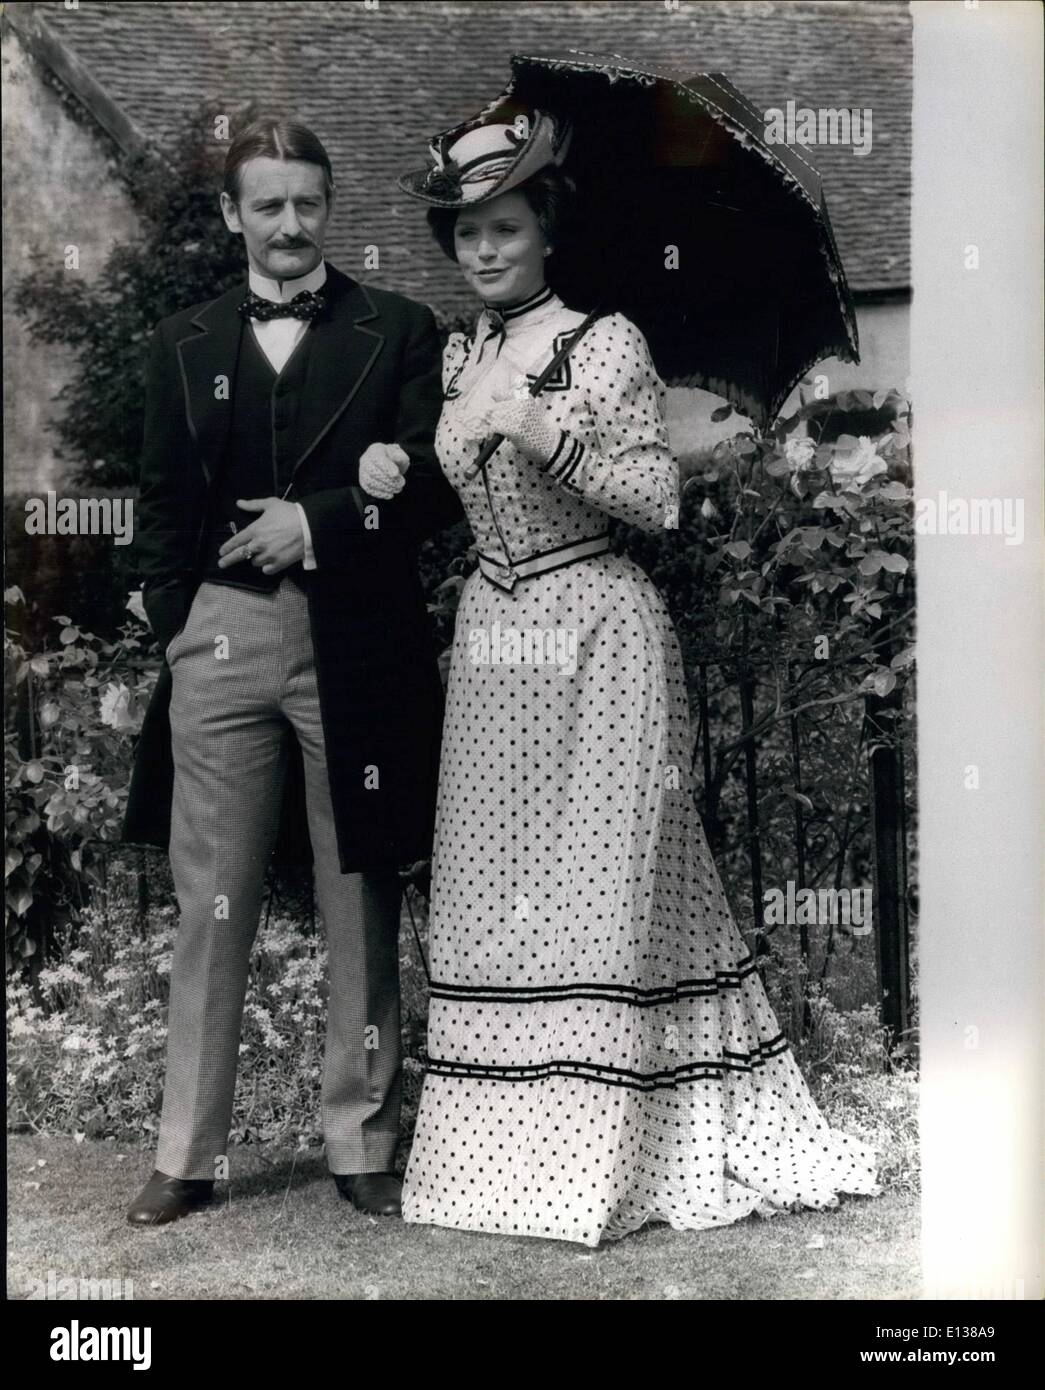 Feb. 29, 2012 - Lee Remick as Lady Randolph Churchill with her first husband Lord Randolph Churchill,played by Ronald Pickup. Although this was taken at Salisbury Hall, Jennie did not move there until after her marriage to George Cornwalliz-West, and Ronald Pickup will not be seen in the sequences filmed there. Stock Photo